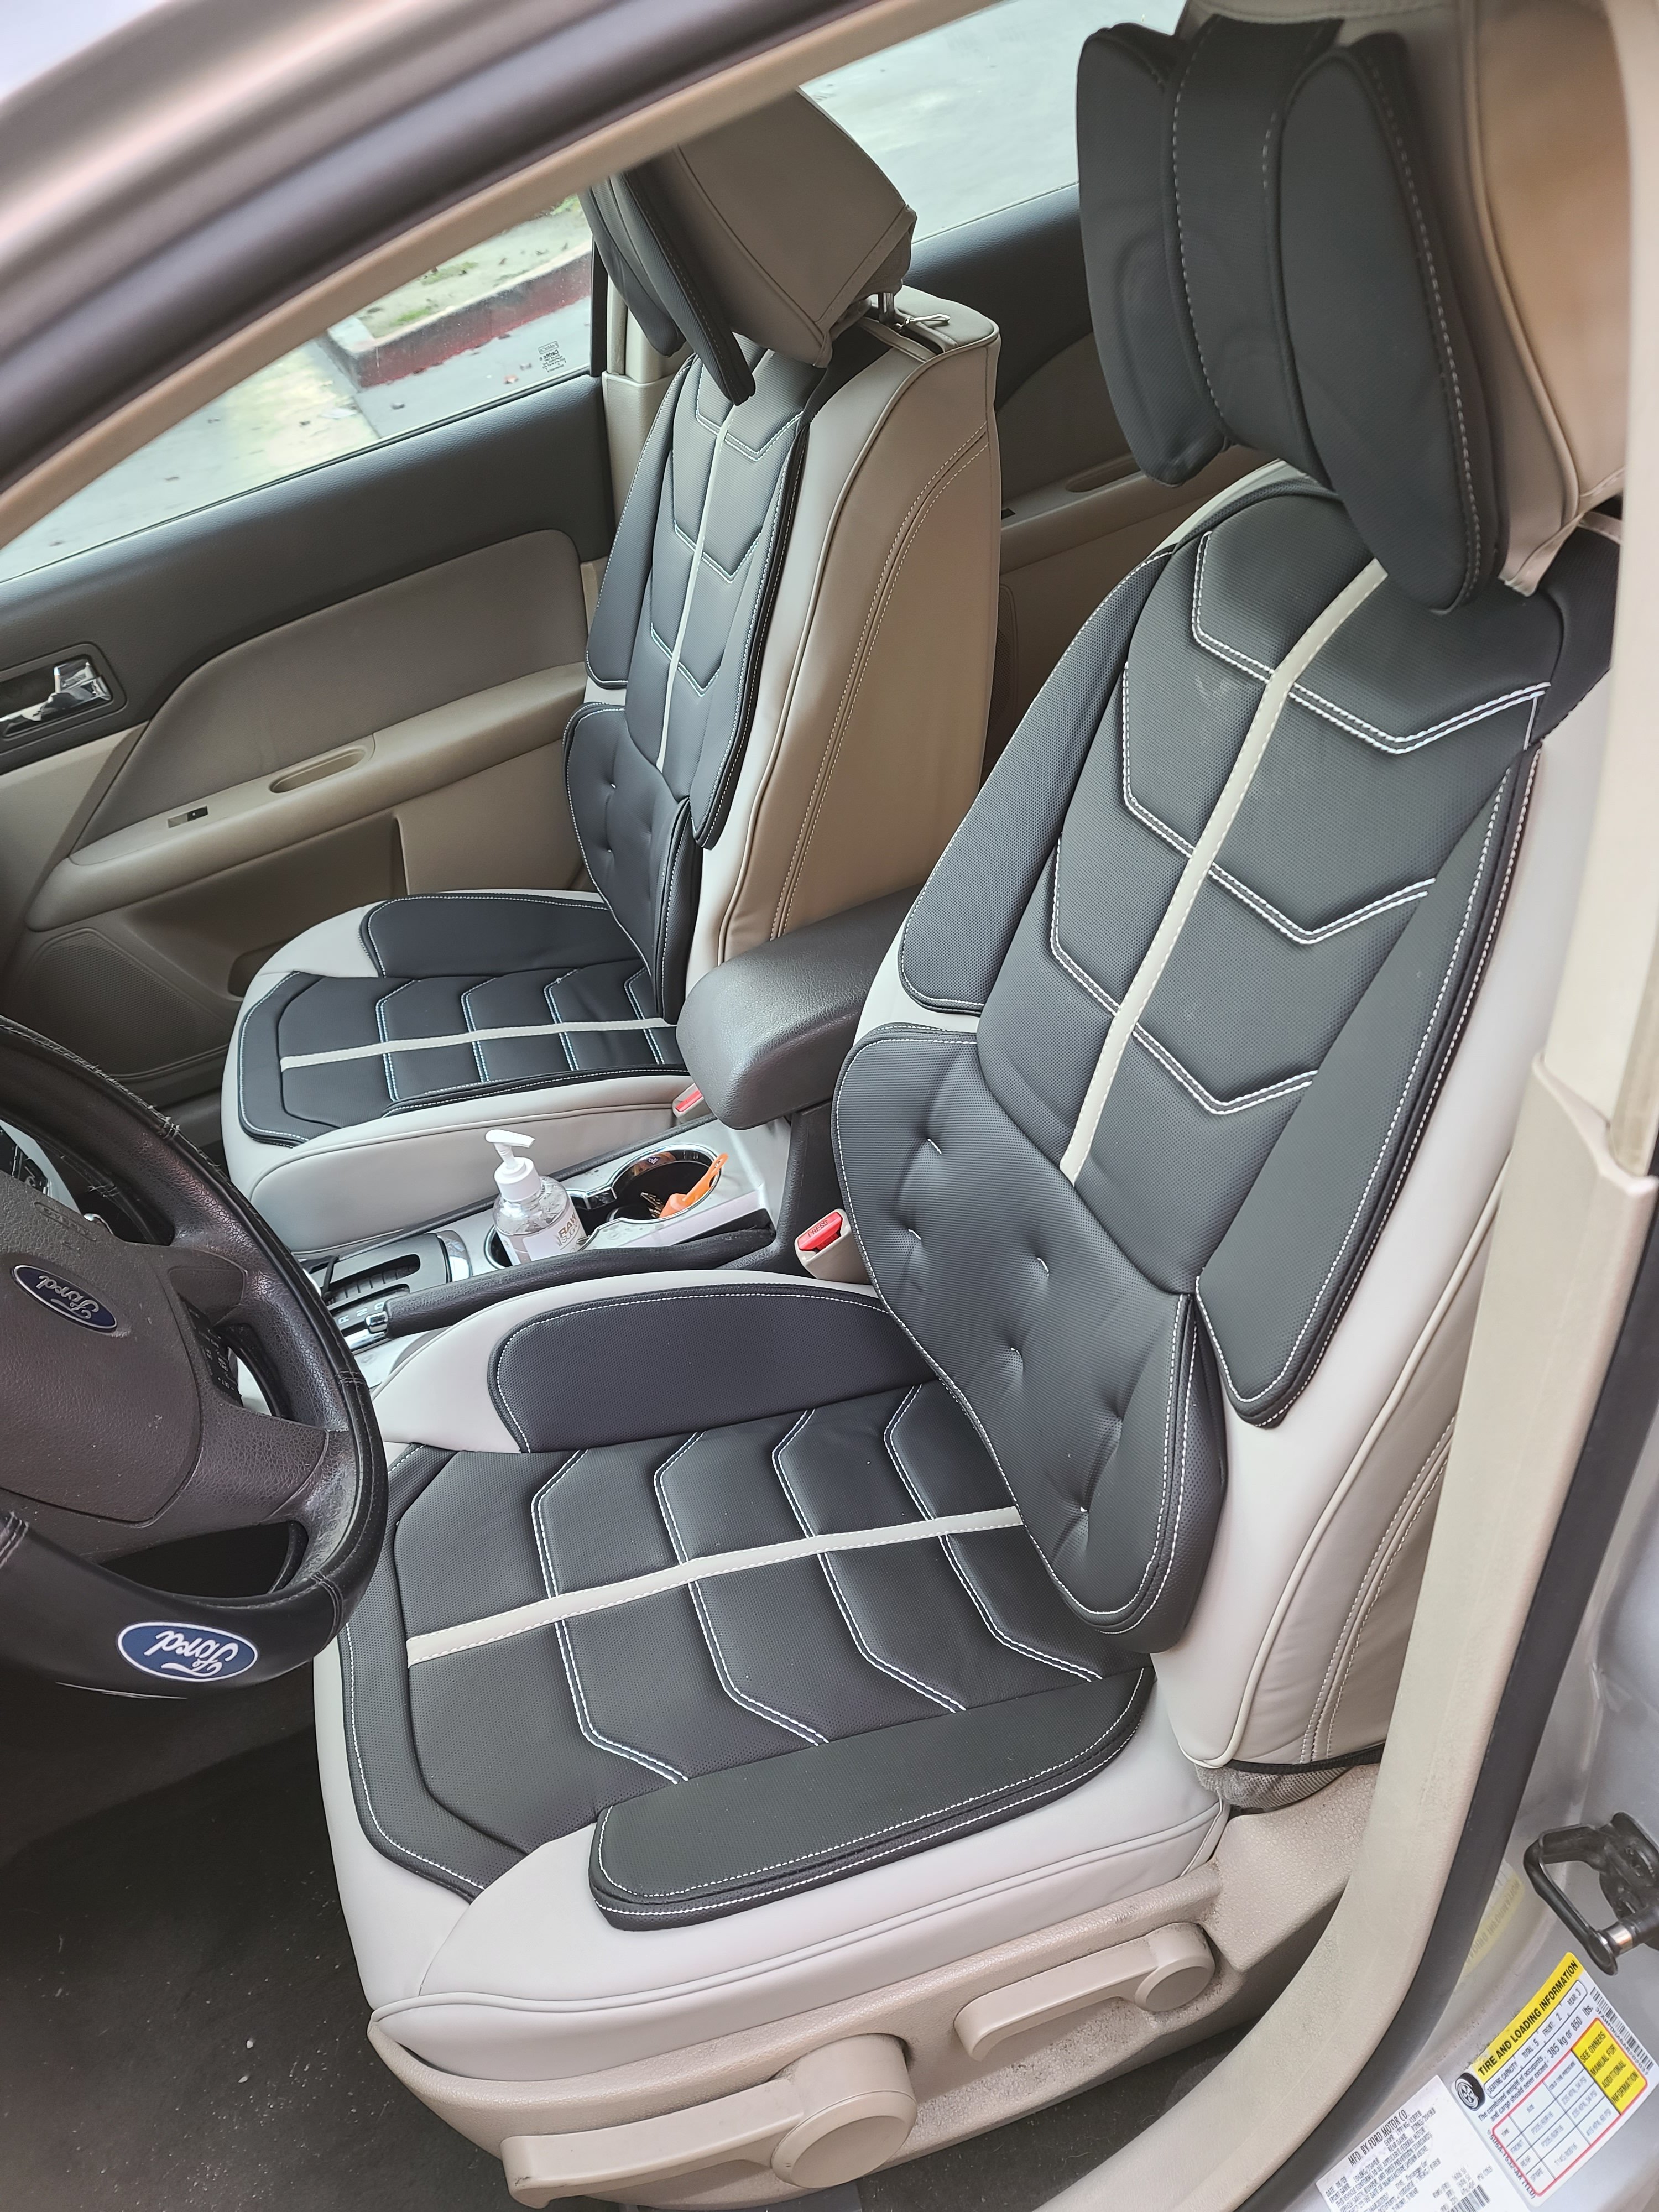 2010 Ford Fusion Seat Cover Installed – Car Seat Cover and Custom Car Floor Mat Seat Covers For A 2010 Ford Fusion